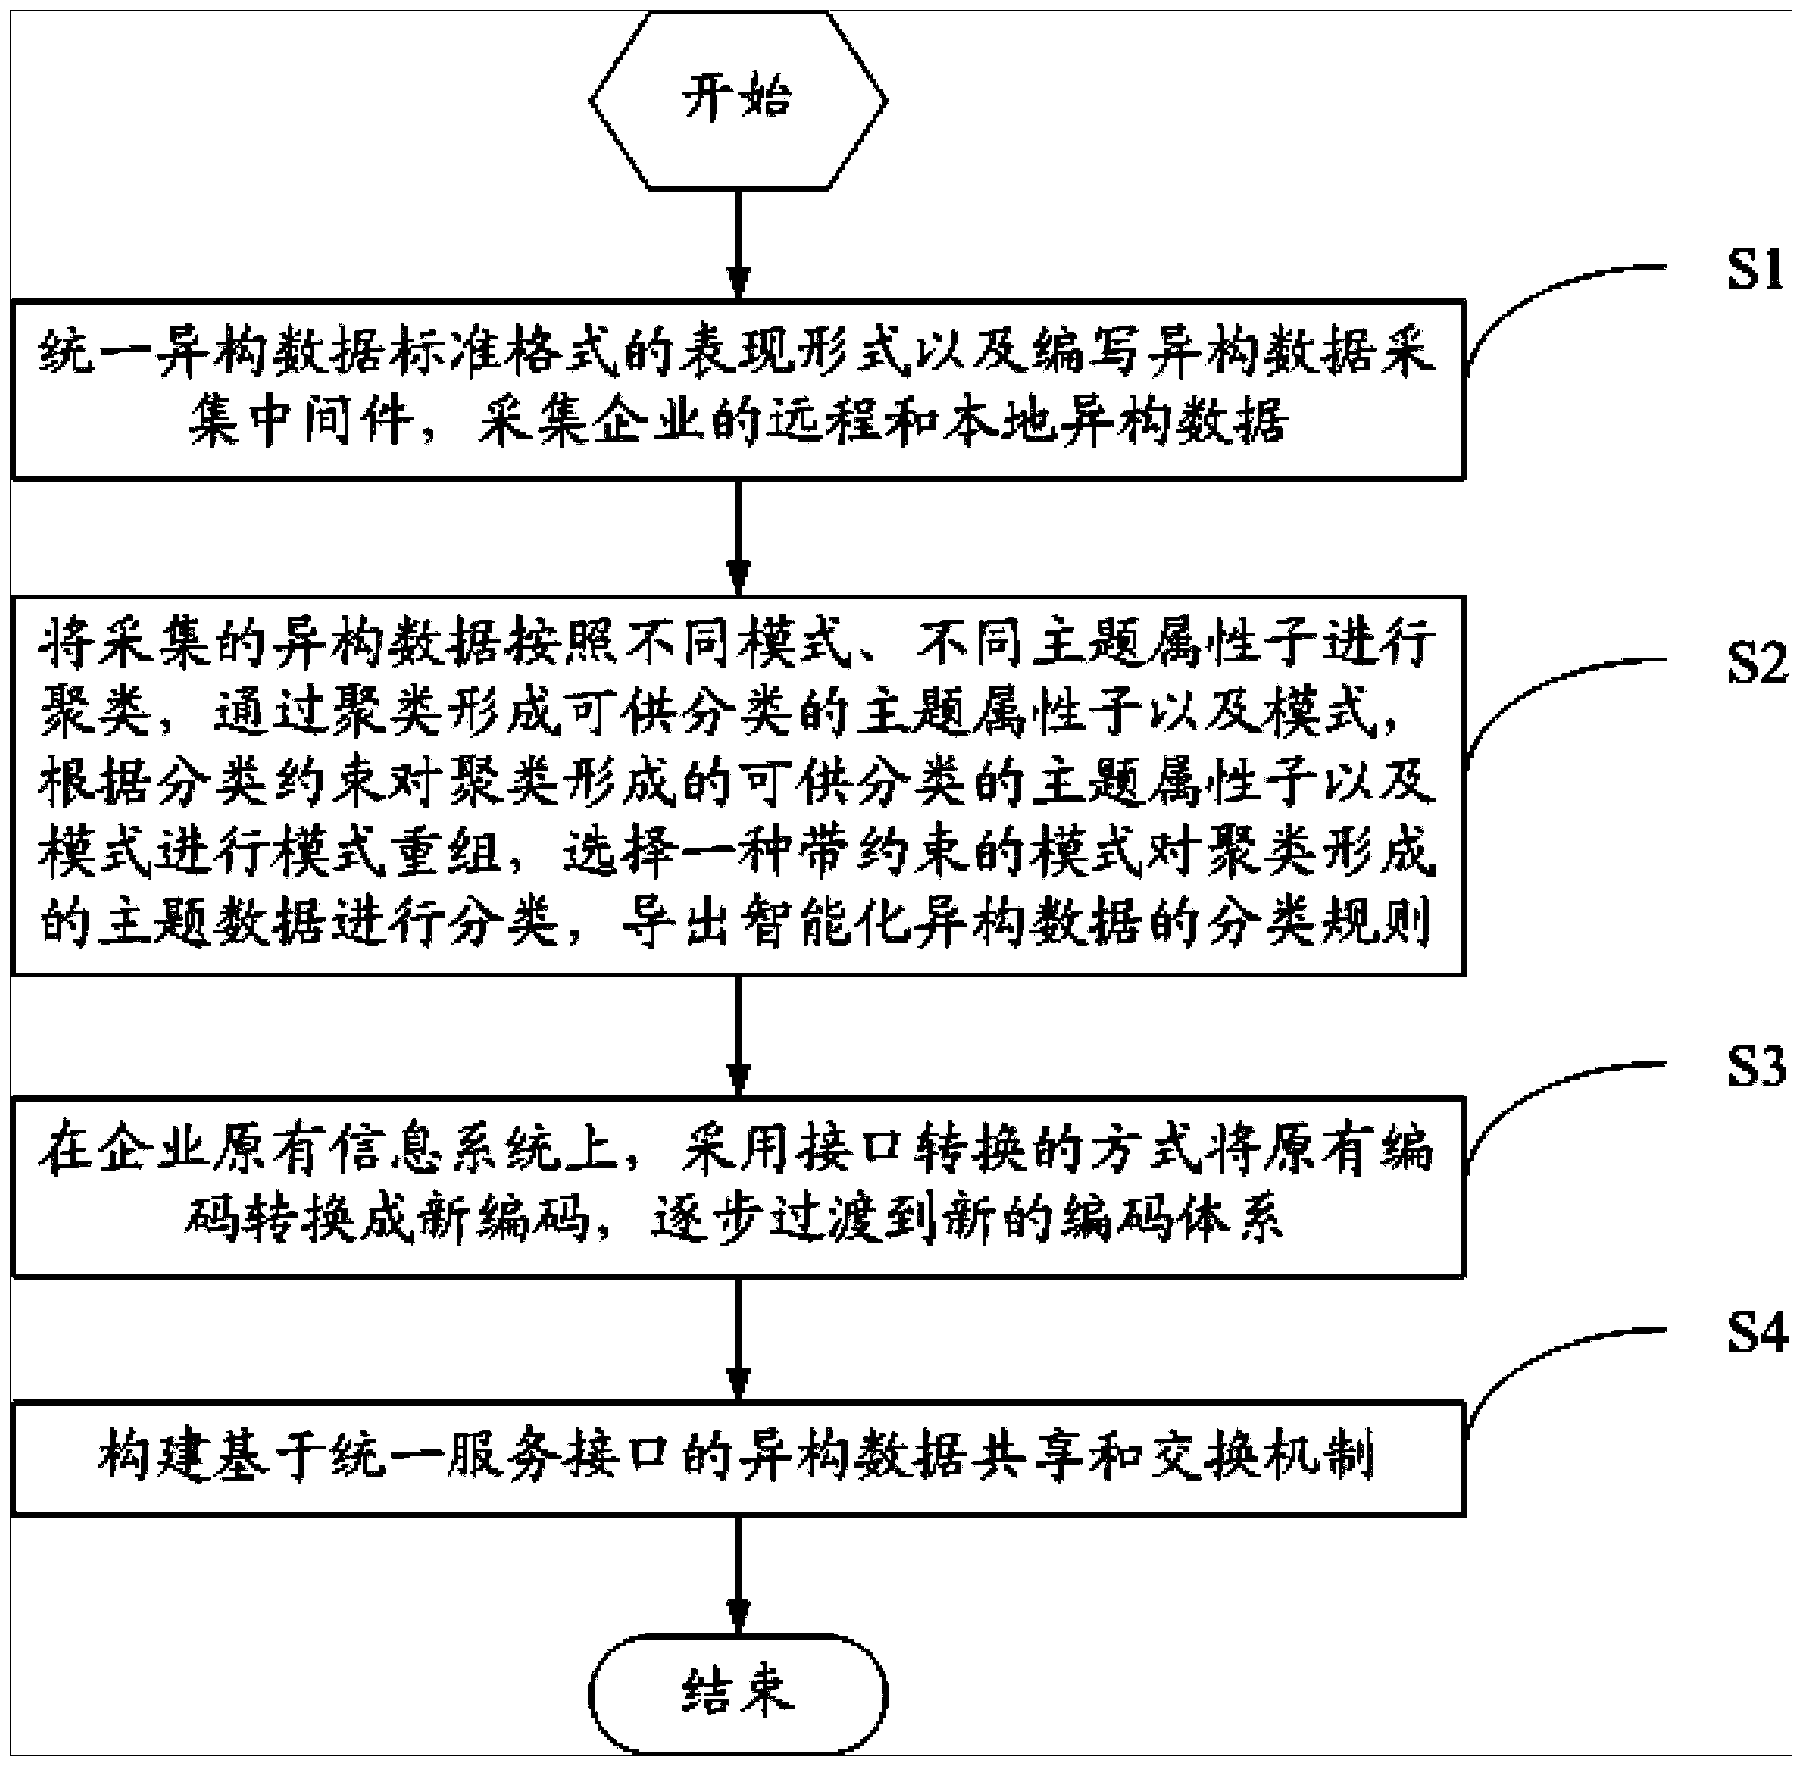 Method and device for sorting coding and integrated exchange and management of heterogeneous data of enterprise